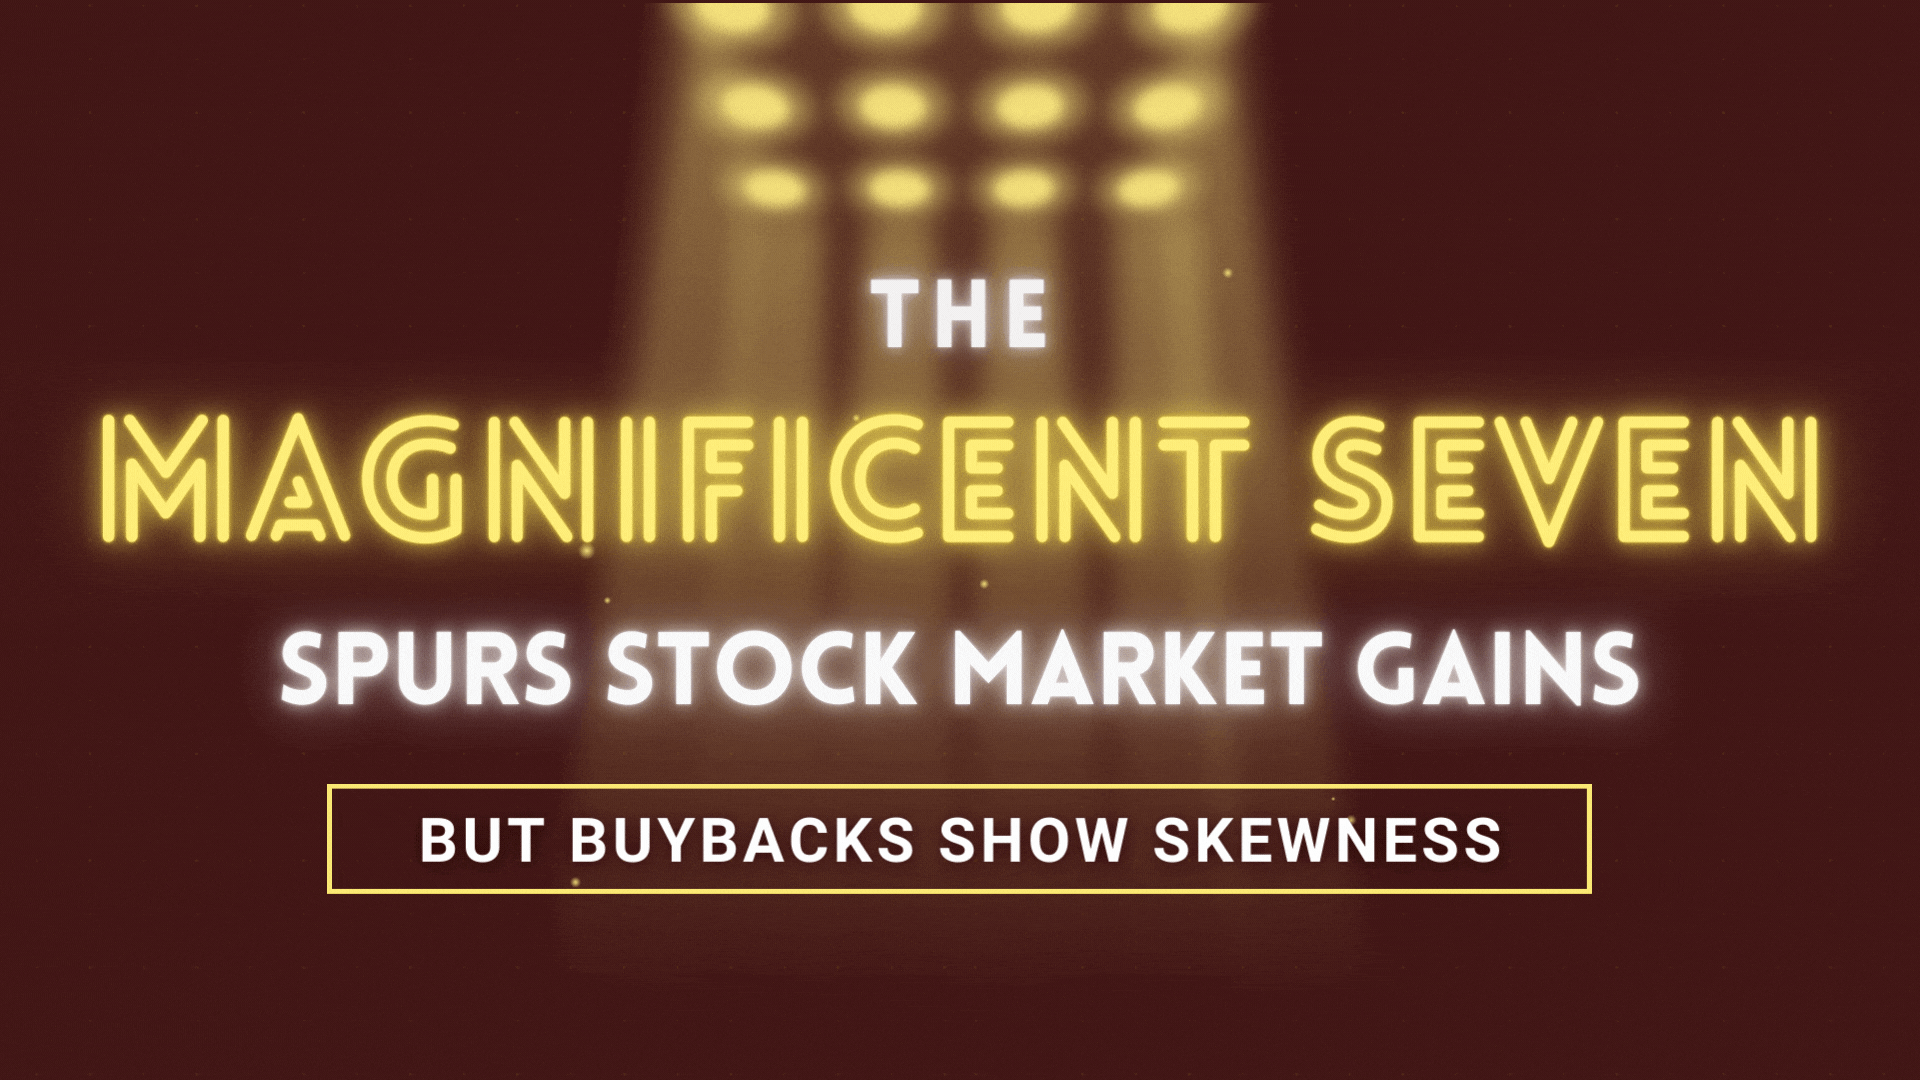 The ‘Magnificent Seven’ Spurs Stock Market Gains, But Buybacks Show